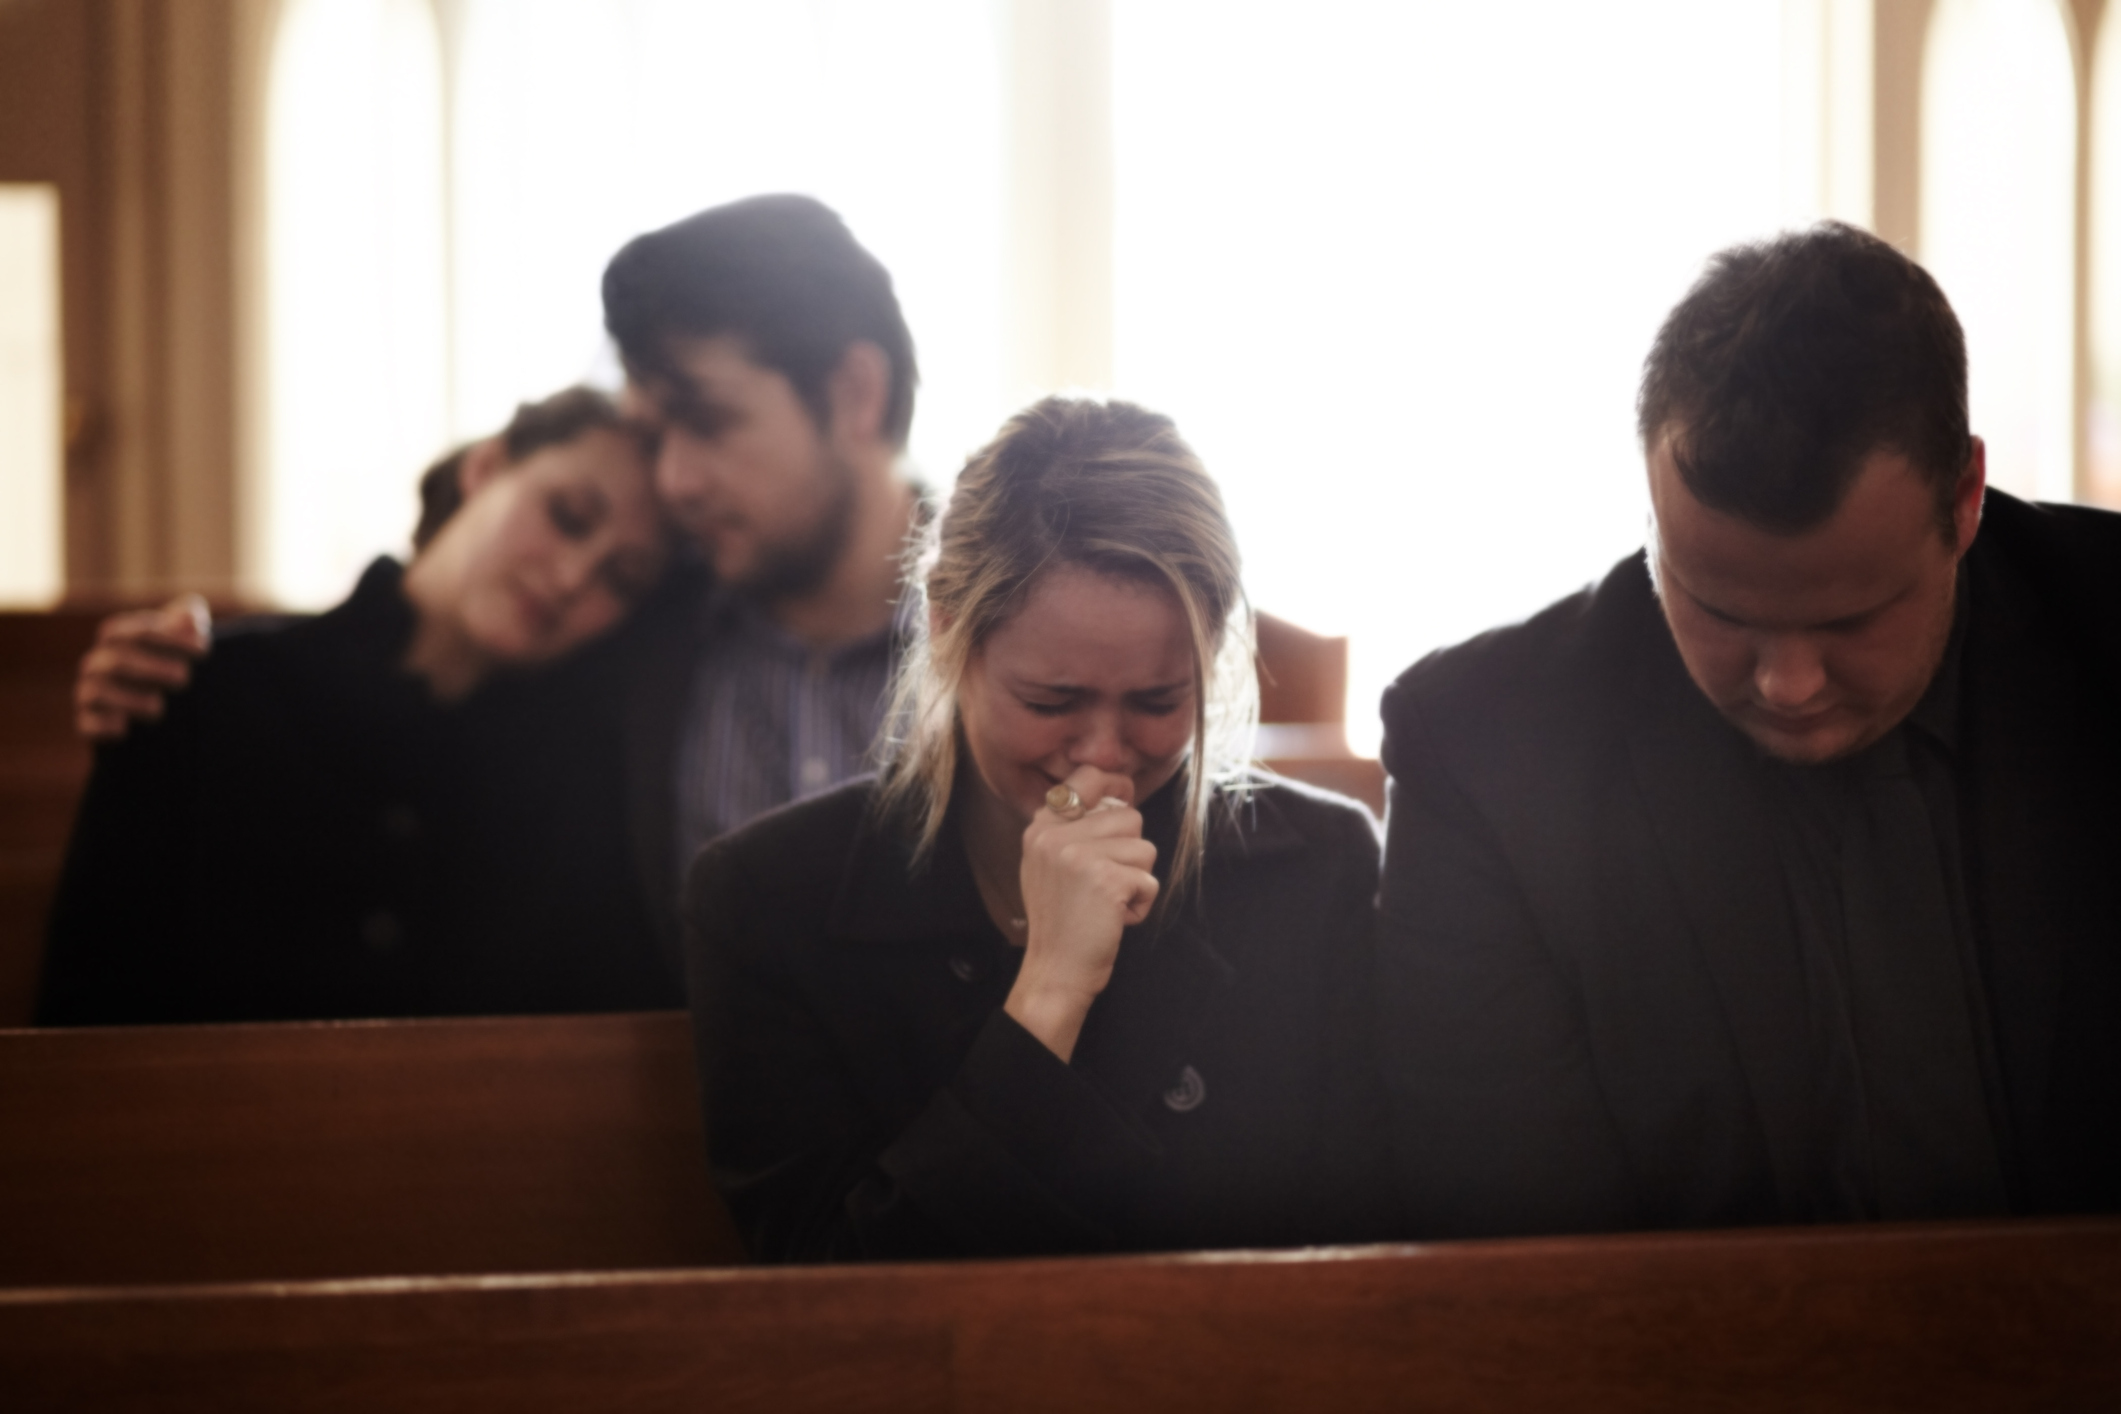 Funerals Are Important - Here’s Why